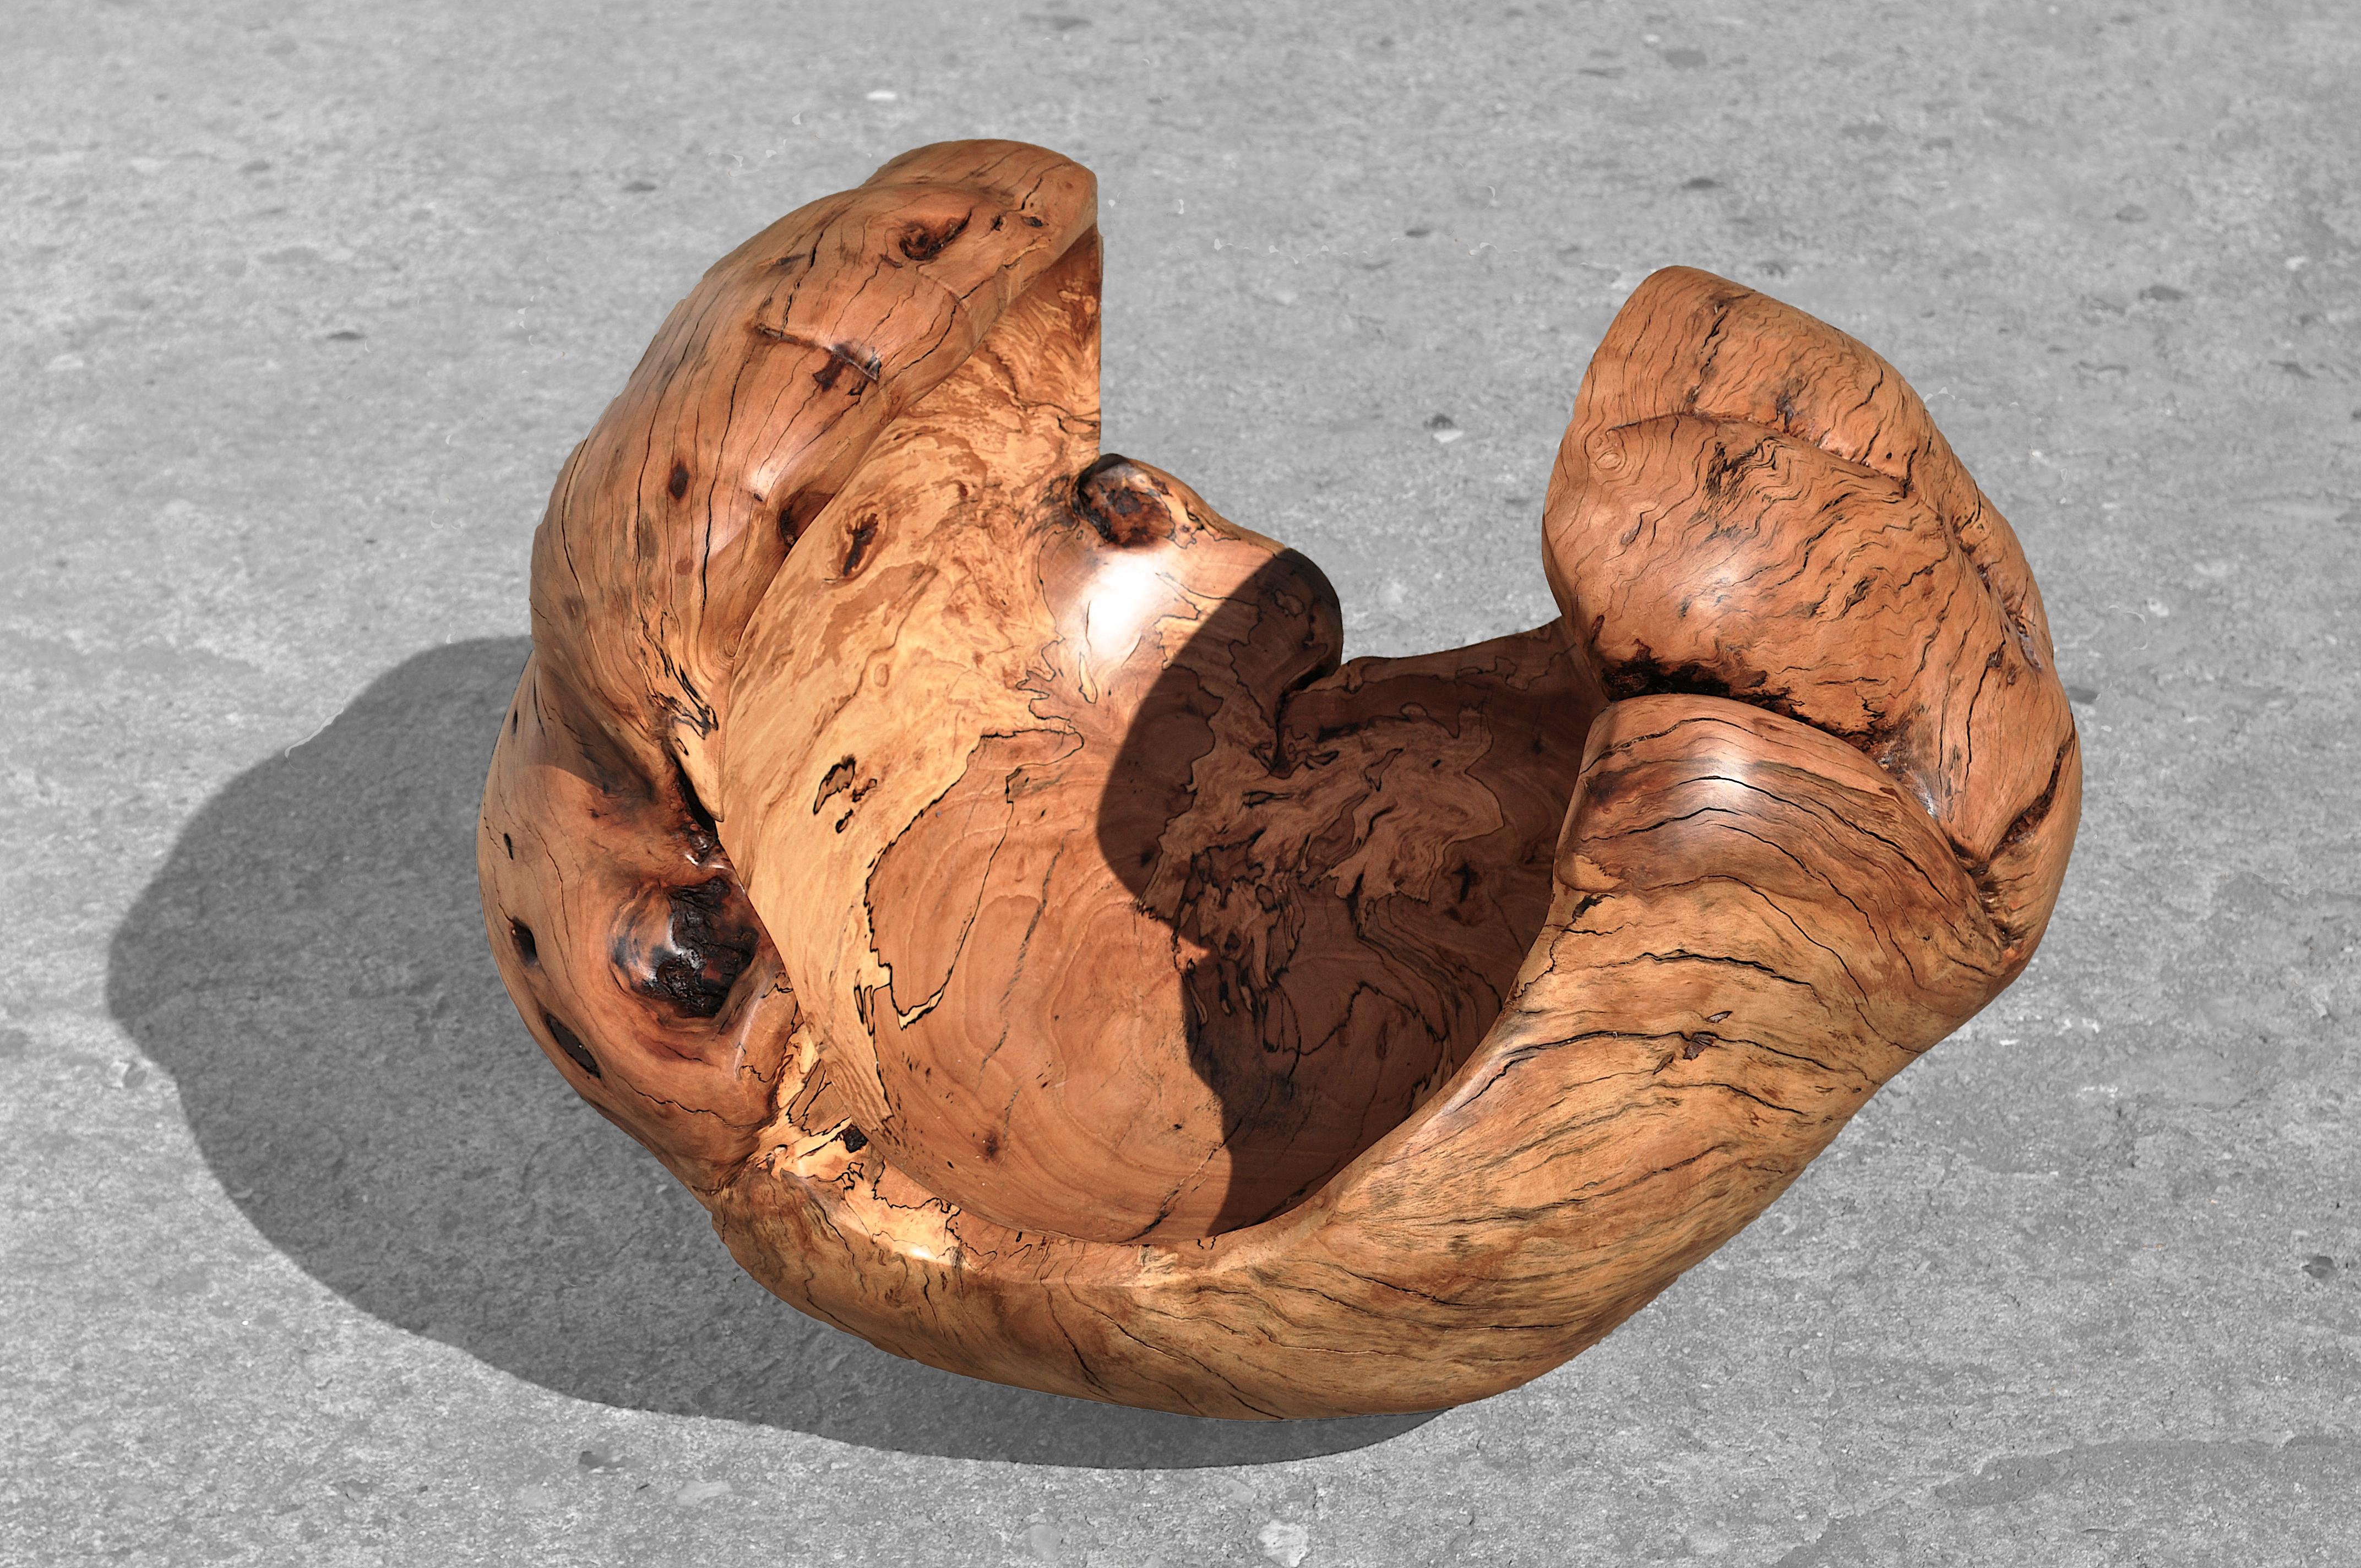 Beech vessel 1396 by Jörg Pietschmann
Dimensions: D 45 x W 60 x H 55 cm 
Materials: beech wood. 
Finish: polished oil finish.


In Pietschmann’s sculptures, trees that for centuries were part of a landscape and founded in primordial forces